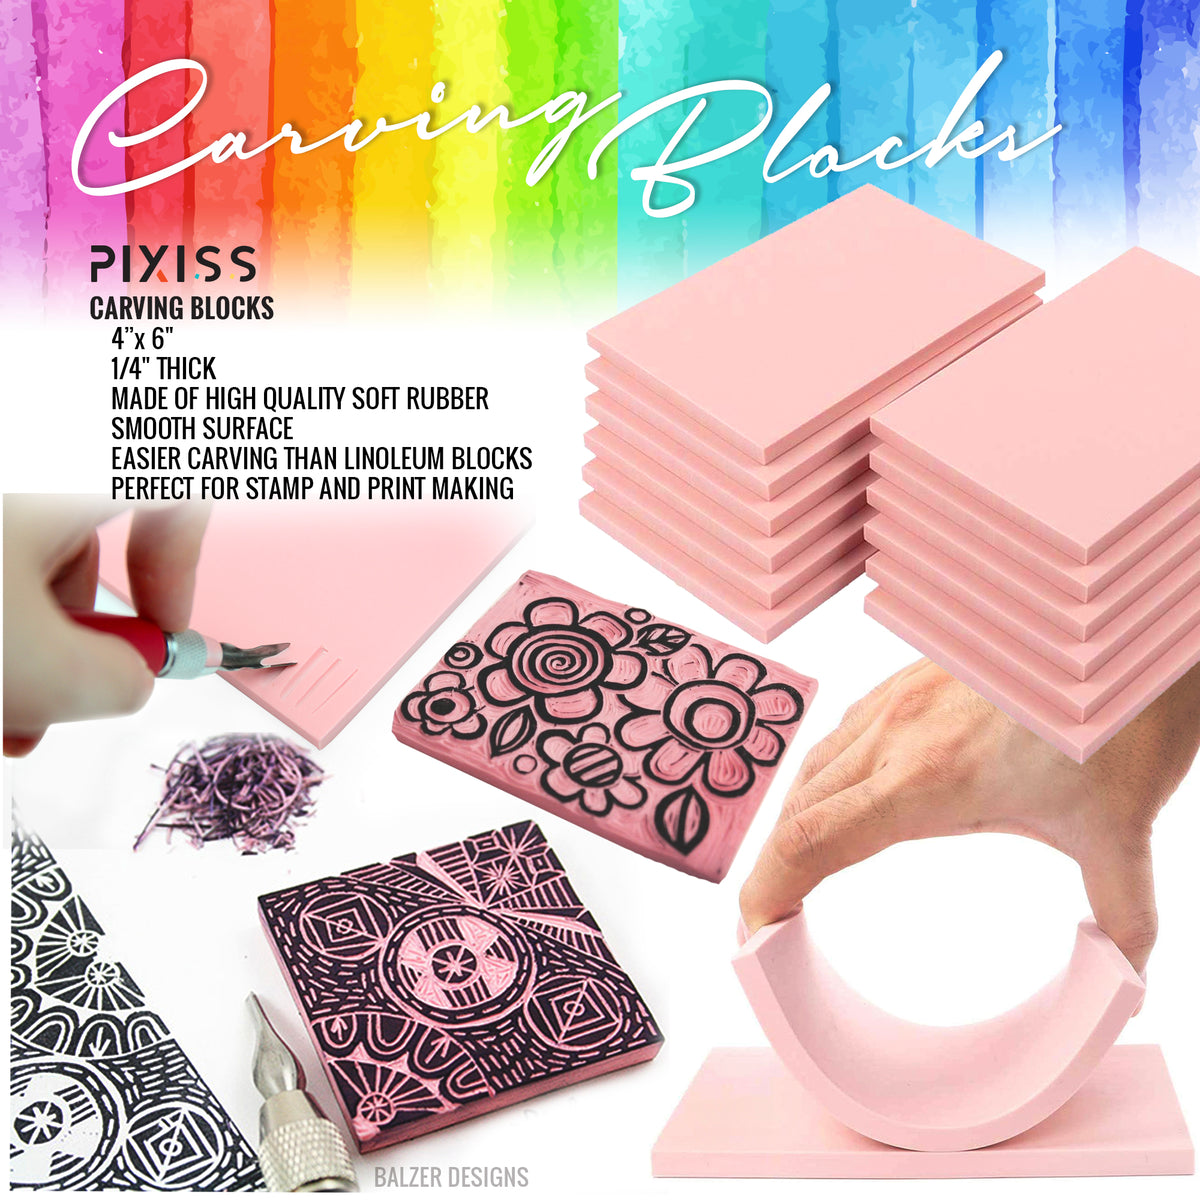  Stamp Pads for Rubber Stamps 5-Pack (6x4) and Rubber Stamp  Carving Tools - Block Printing Kit by Pixiss - Rubber Block Stamp Maker  Printmaking Supplies : Arts, Crafts & Sewing